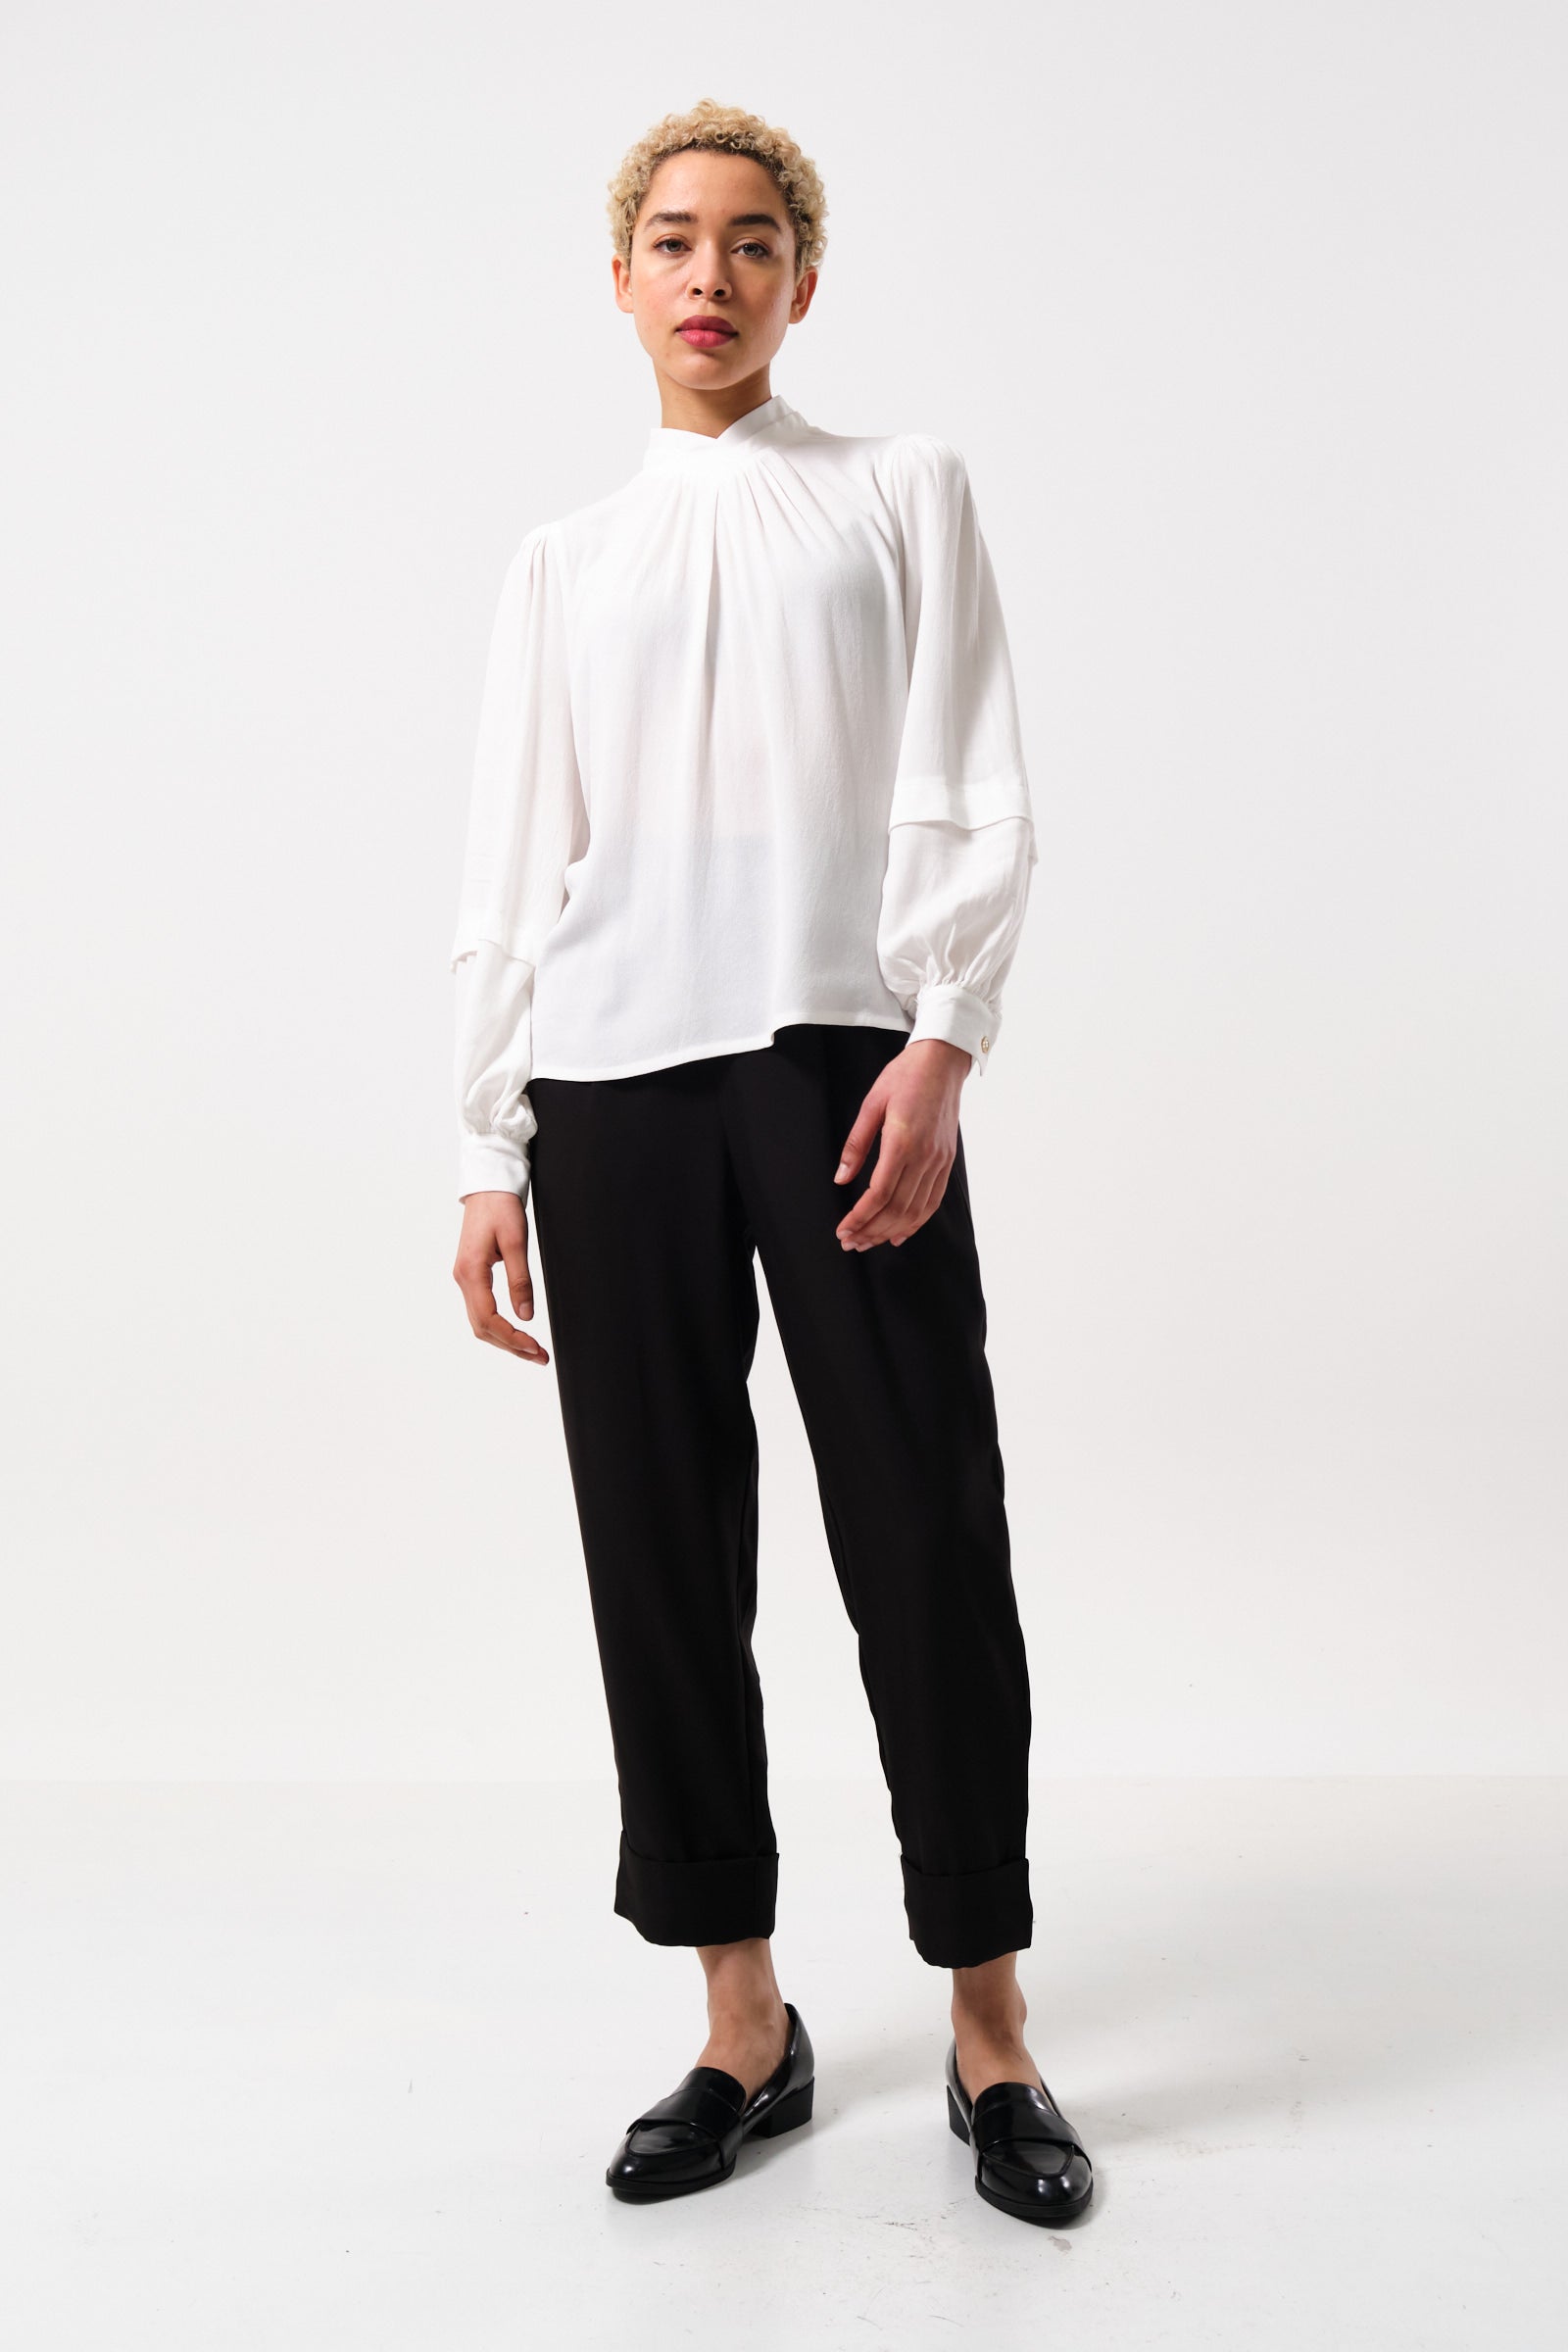 Bayeux Sustainable Fabric Tailored Crop Black Trousers